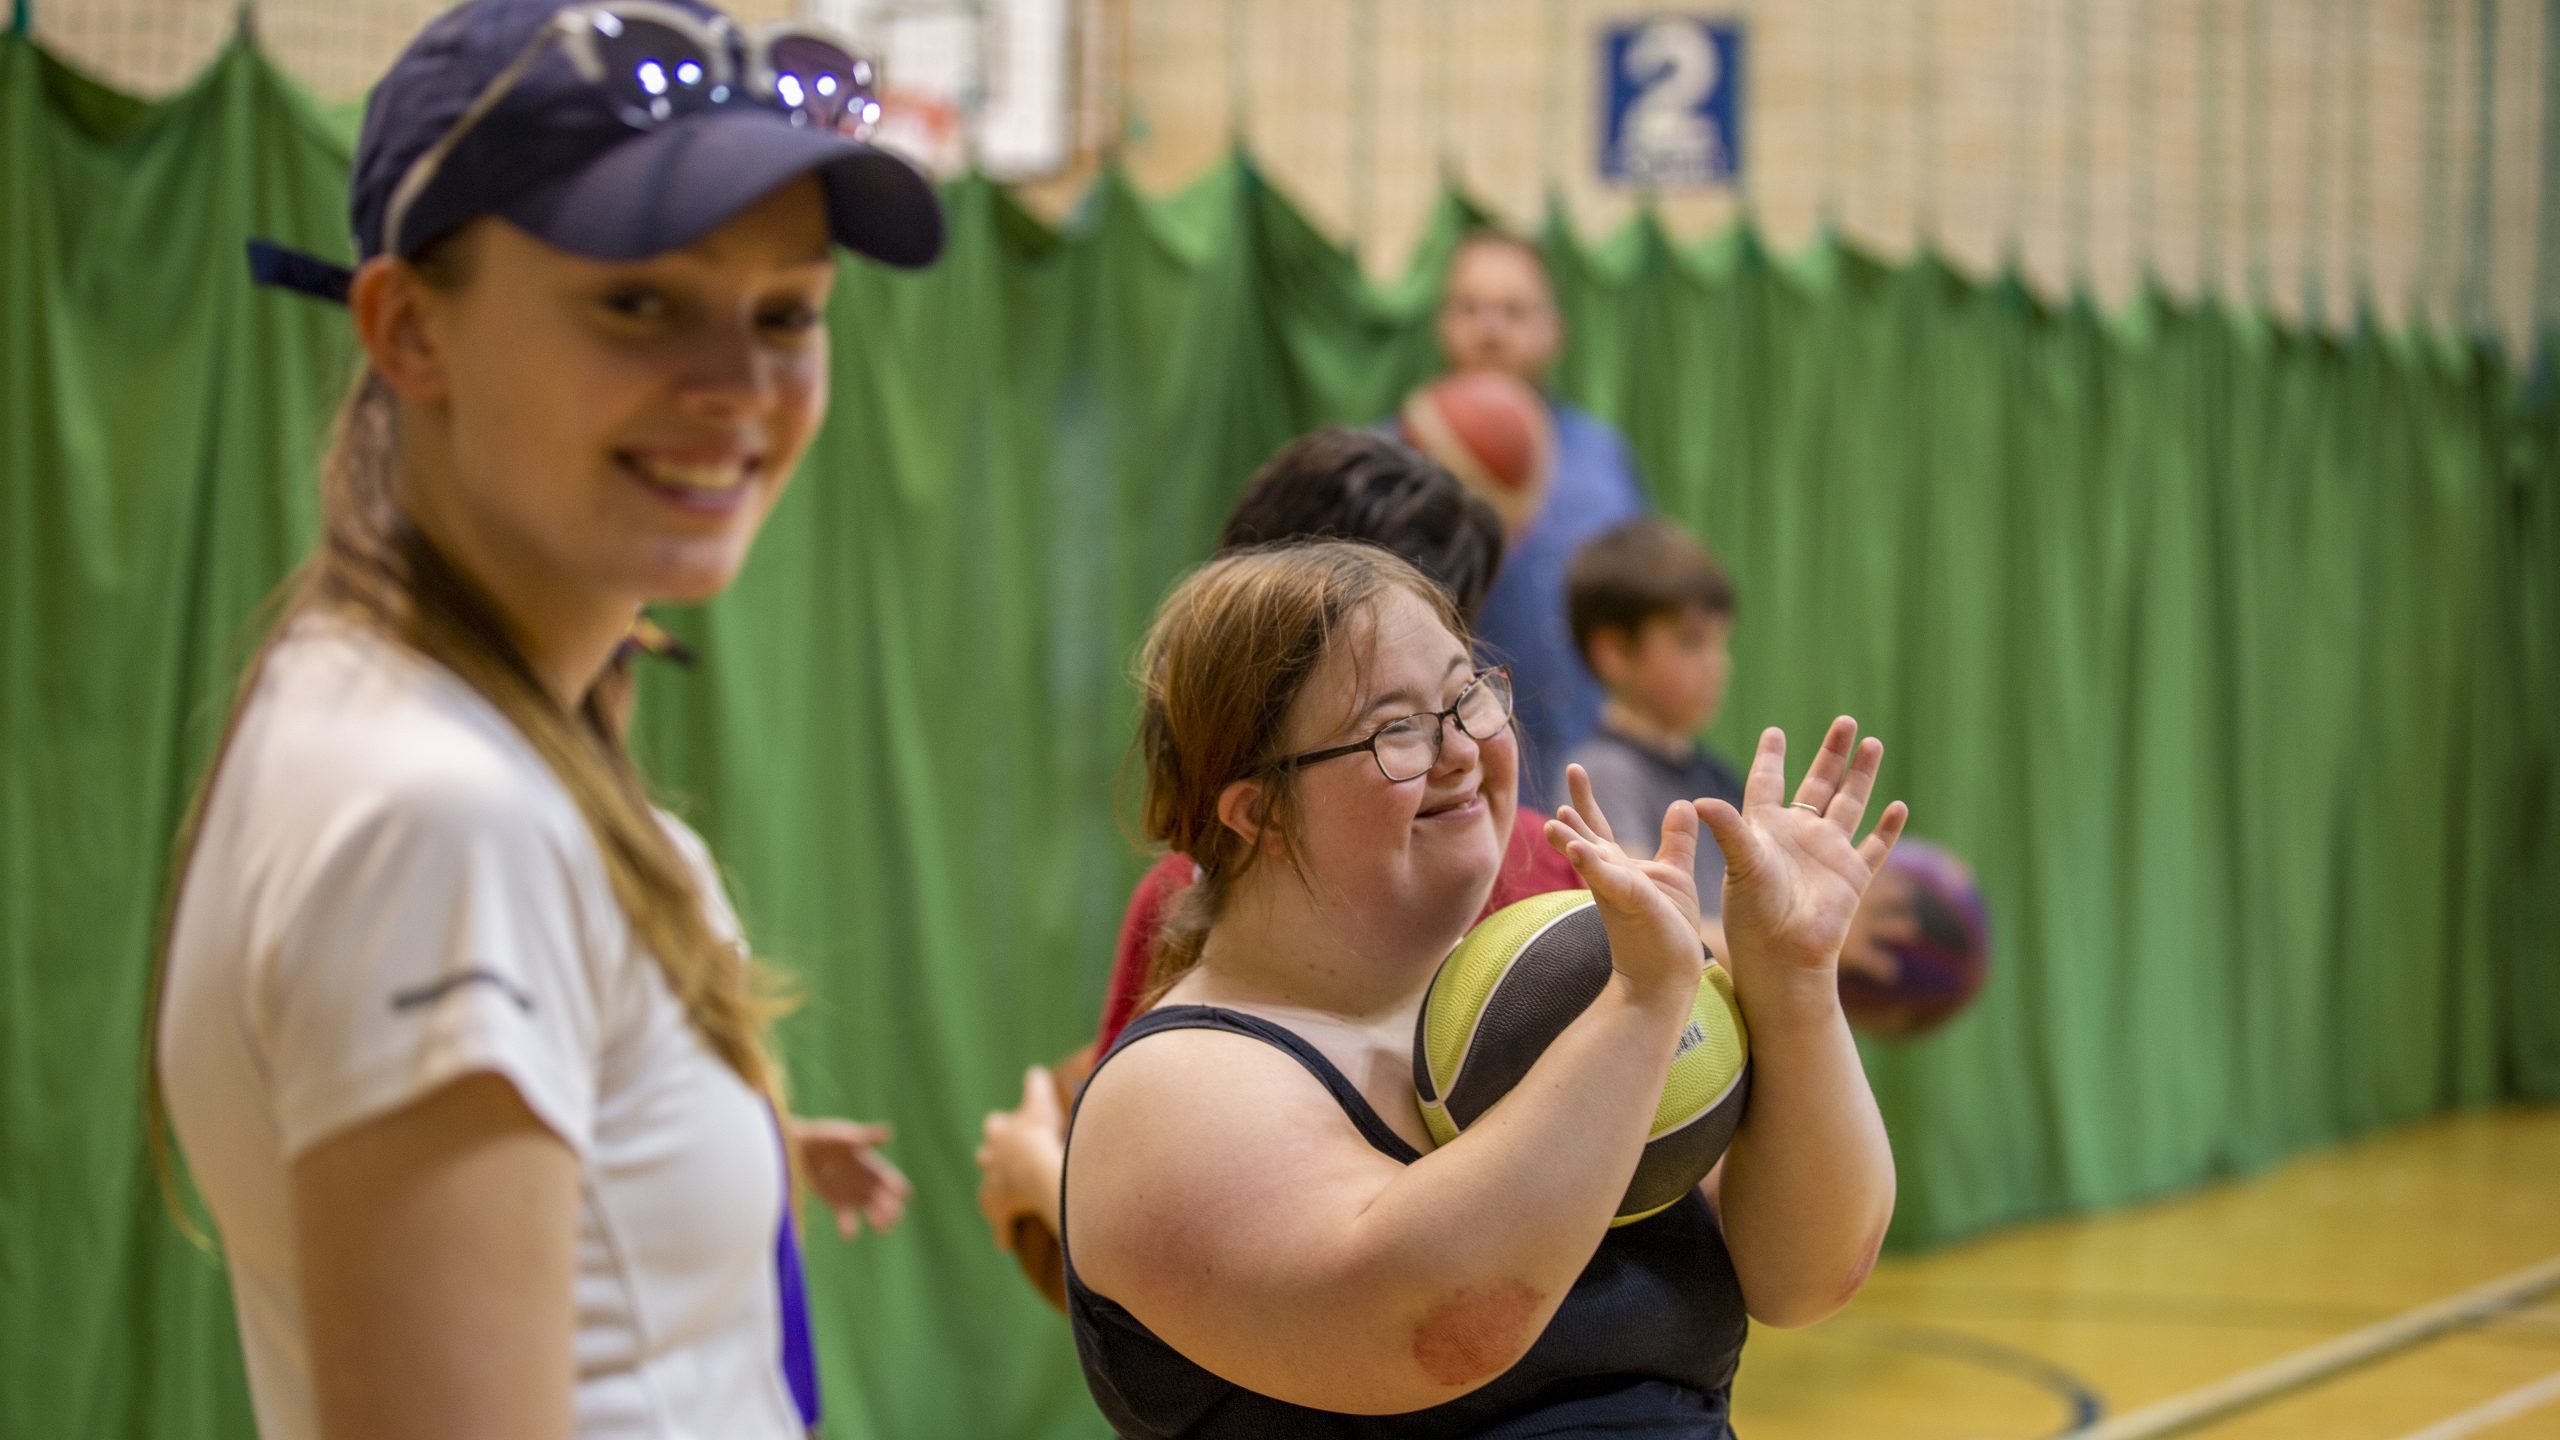 A girl with down syndrome and a volunteer taking part in a sport class